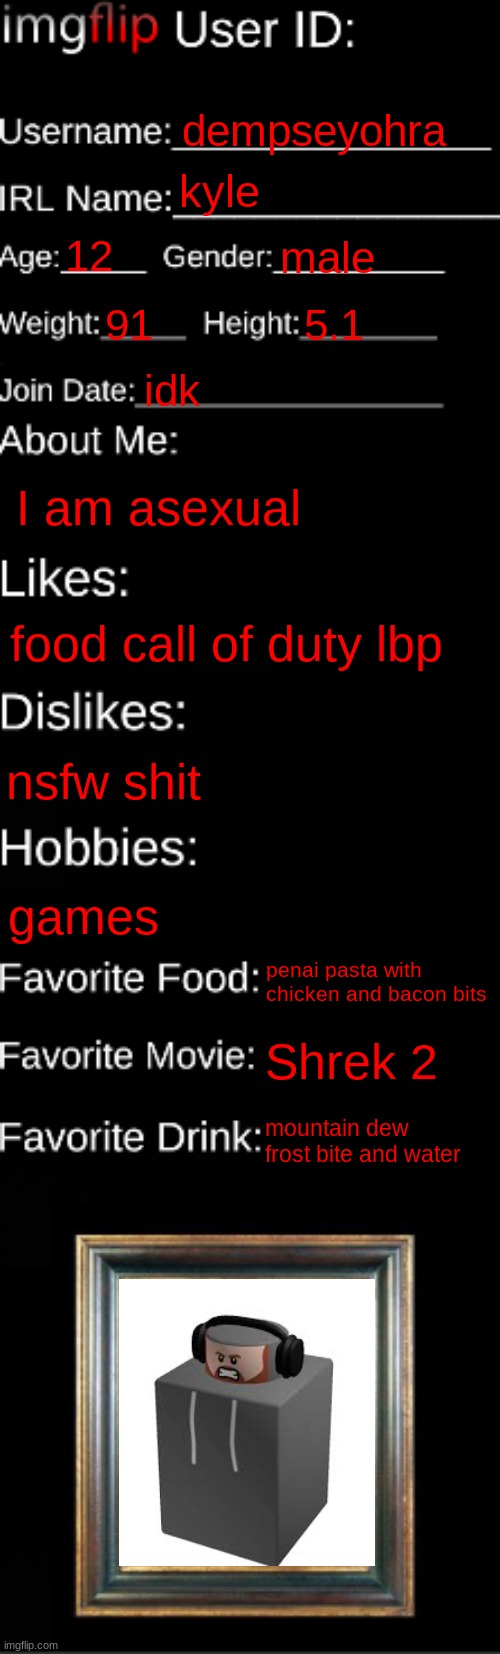 my id | dempseyohra; kyle; 12; male; 91; 5.1; idk; I am asexual; food call of duty lbp; nsfw shit; games; penai pasta with chicken and bacon bits; Shrek 2; mountain dew frost bite and water | image tagged in imgflip id card | made w/ Imgflip meme maker